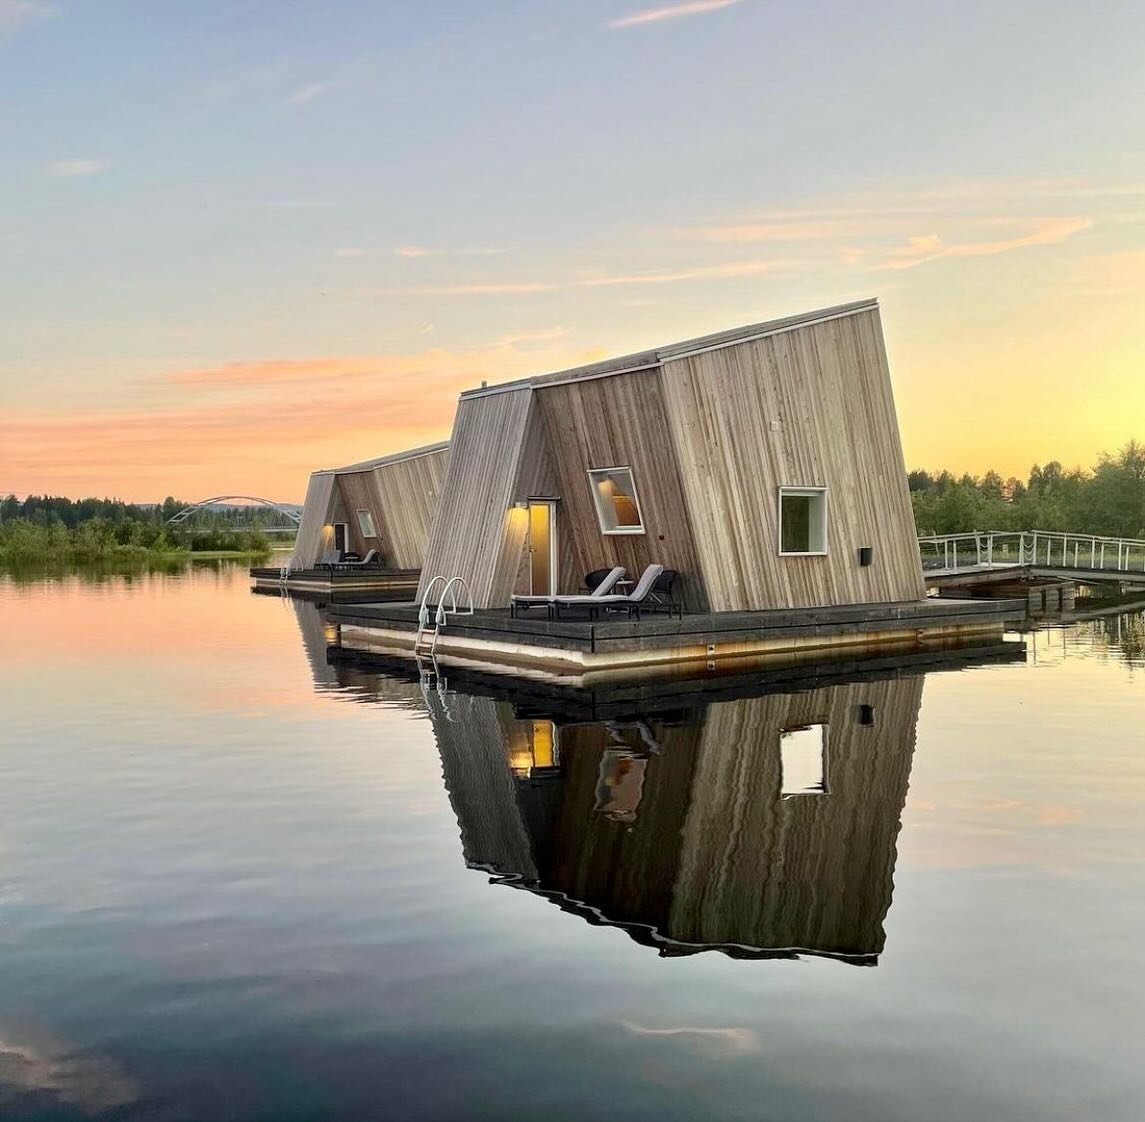 Open-air spa. Free-floating cabins. Feeling alive in the ice river water @arcticbath_sweden #RoomandWild